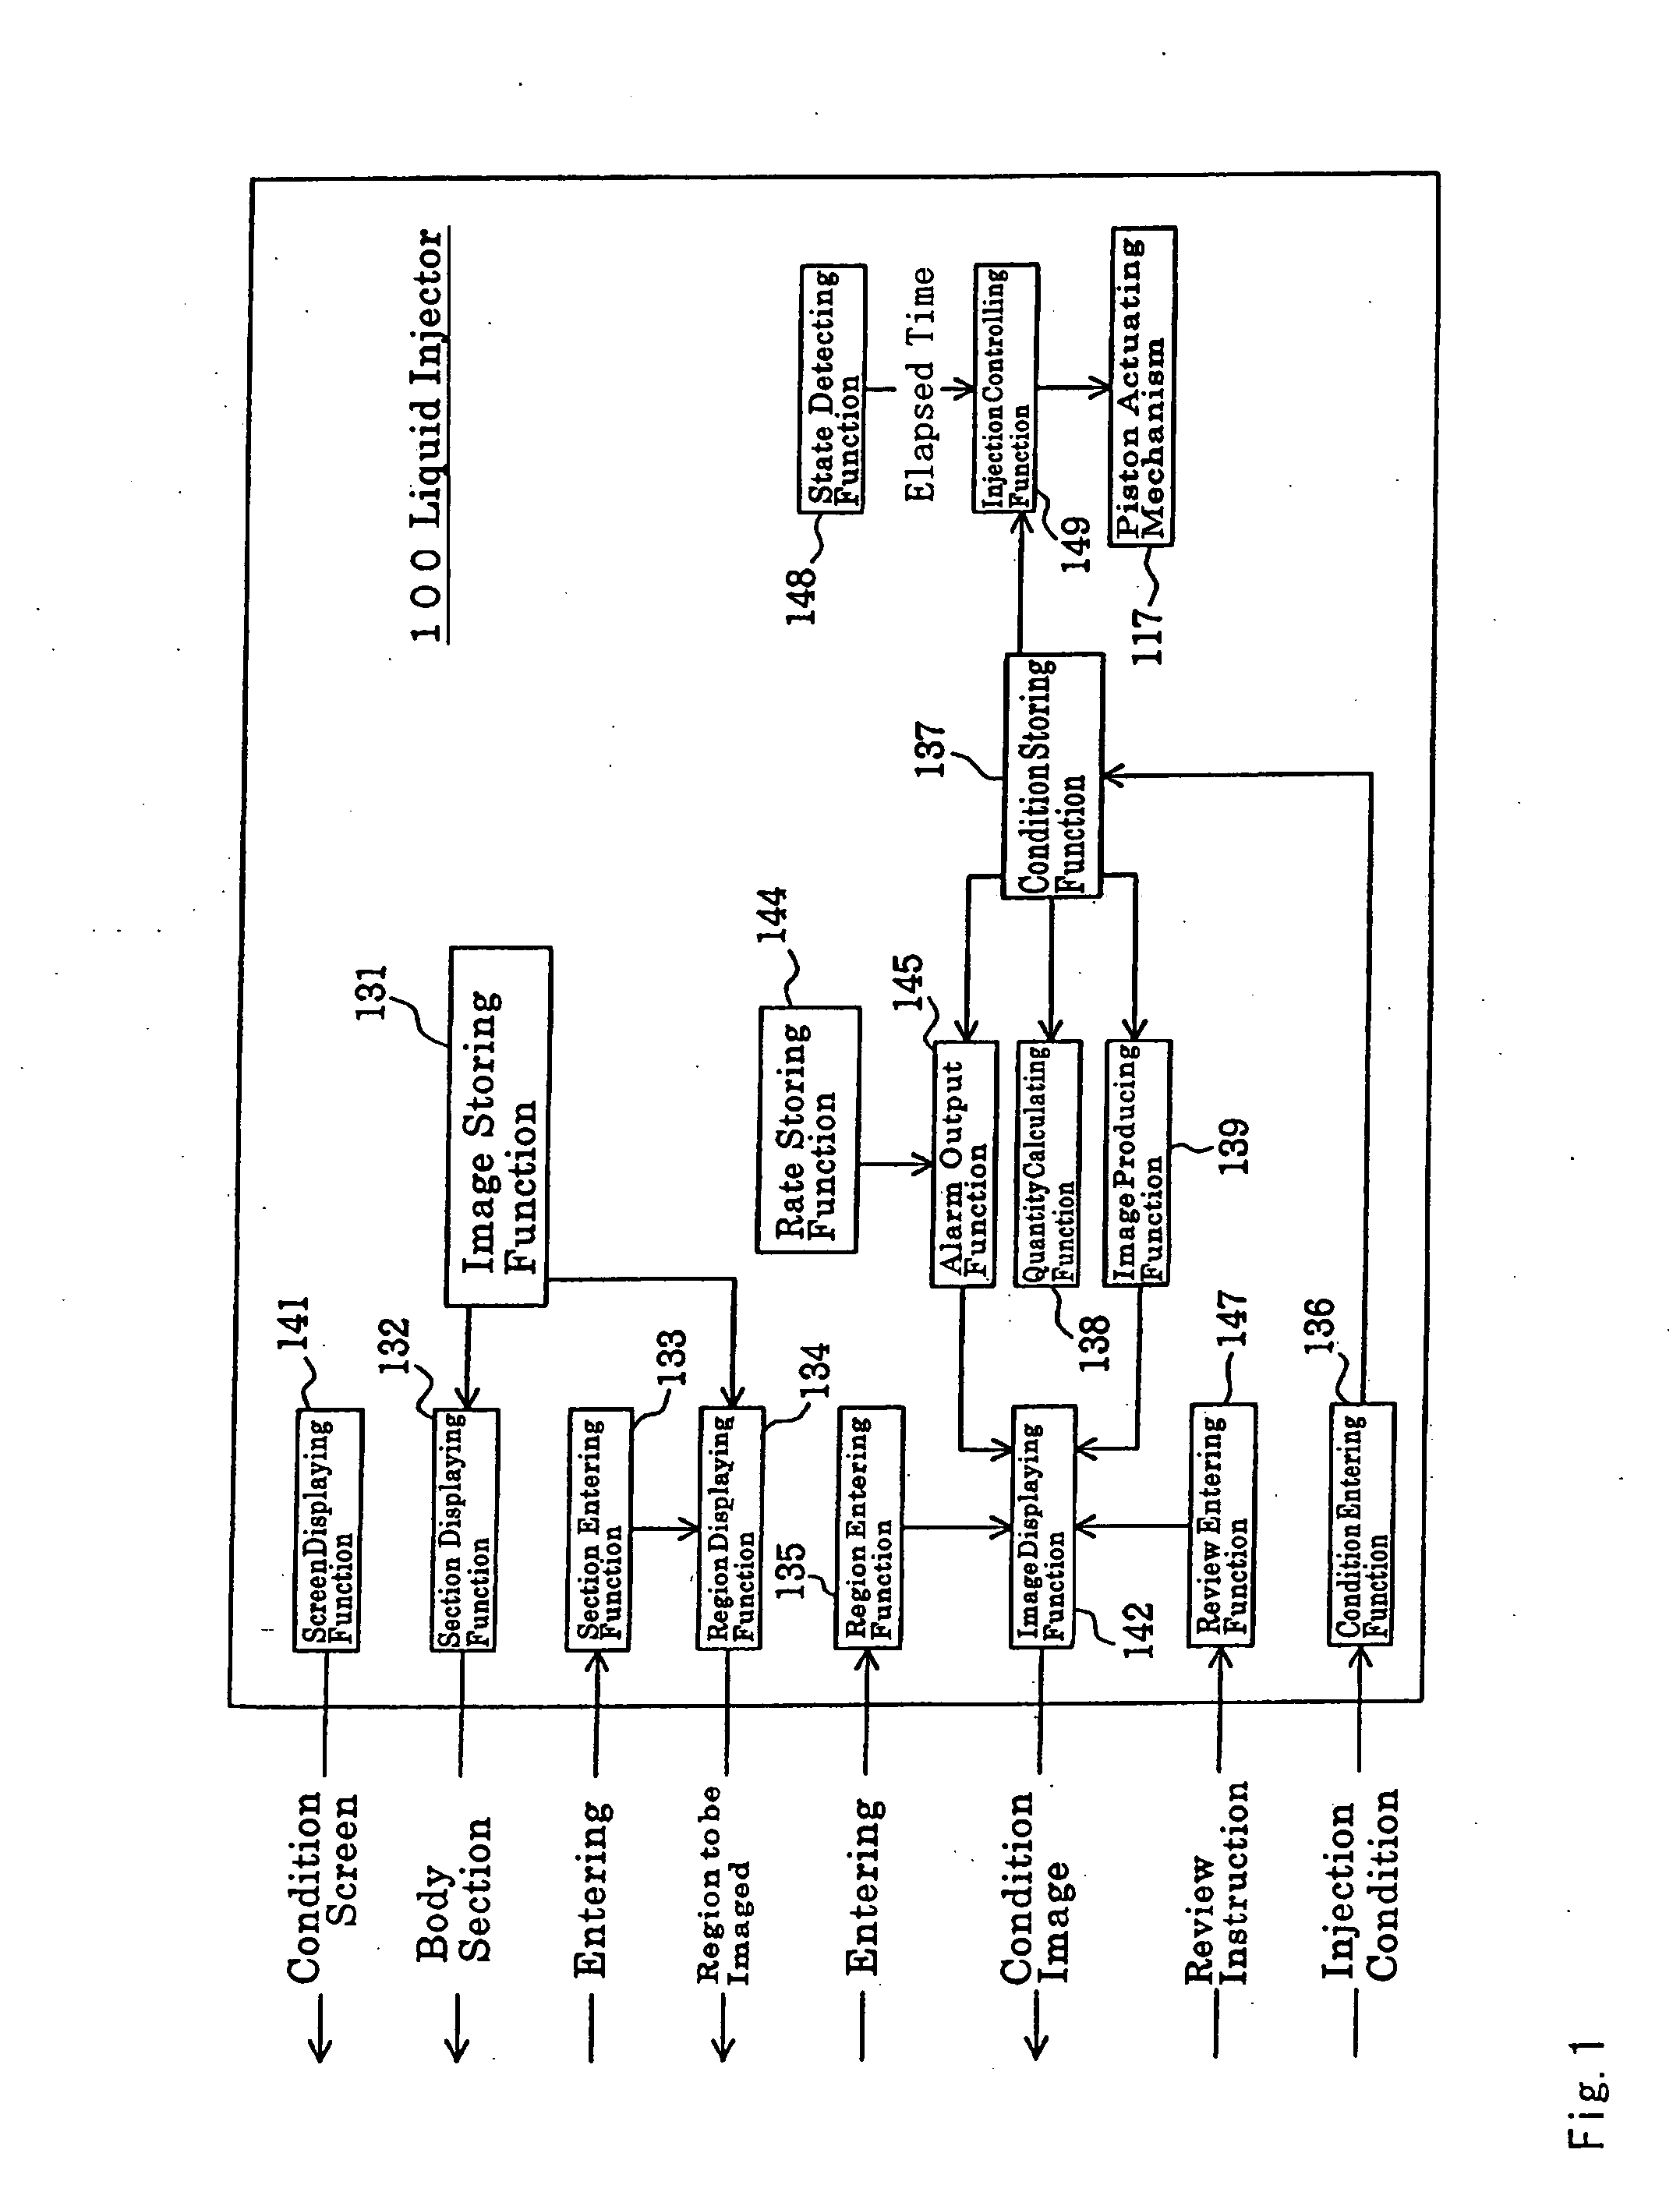 Medicine infuser for displaying image of entered infusion condition